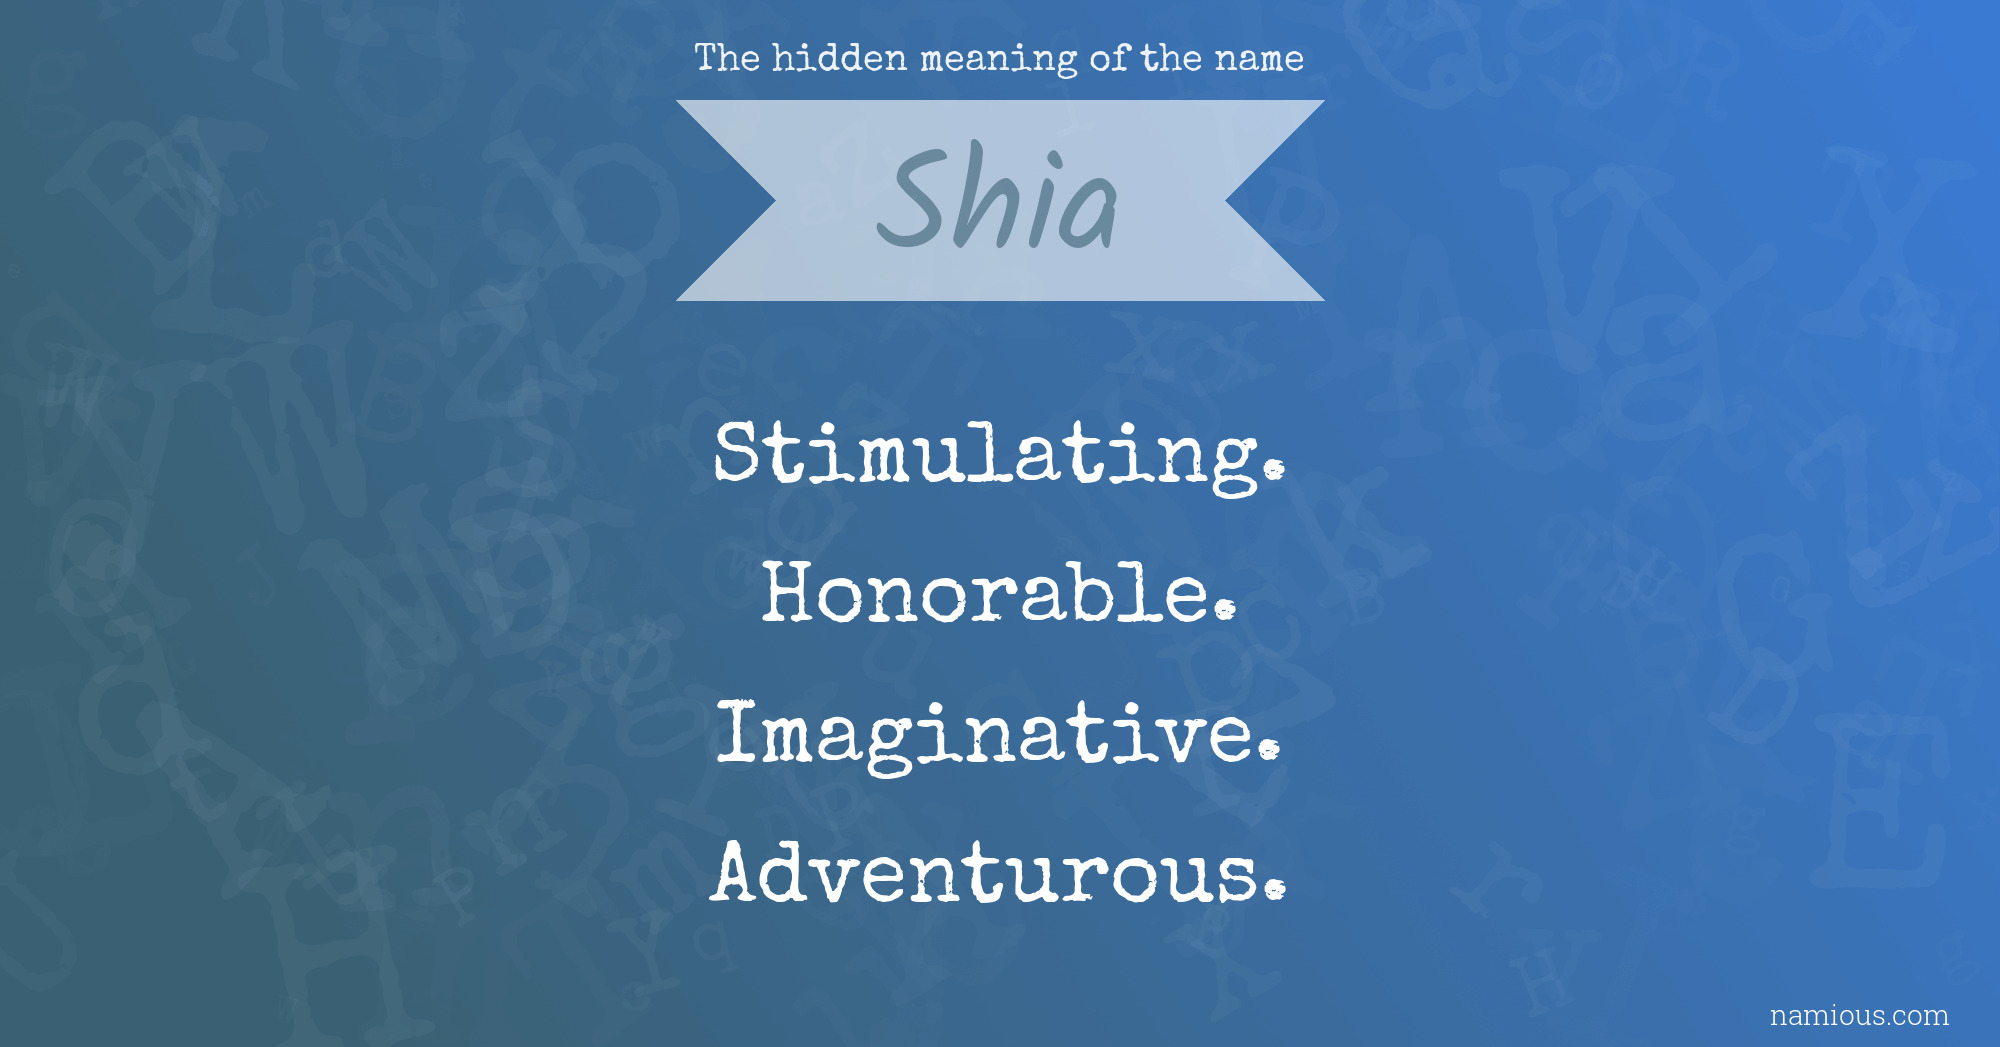 The hidden meaning of the name Shia